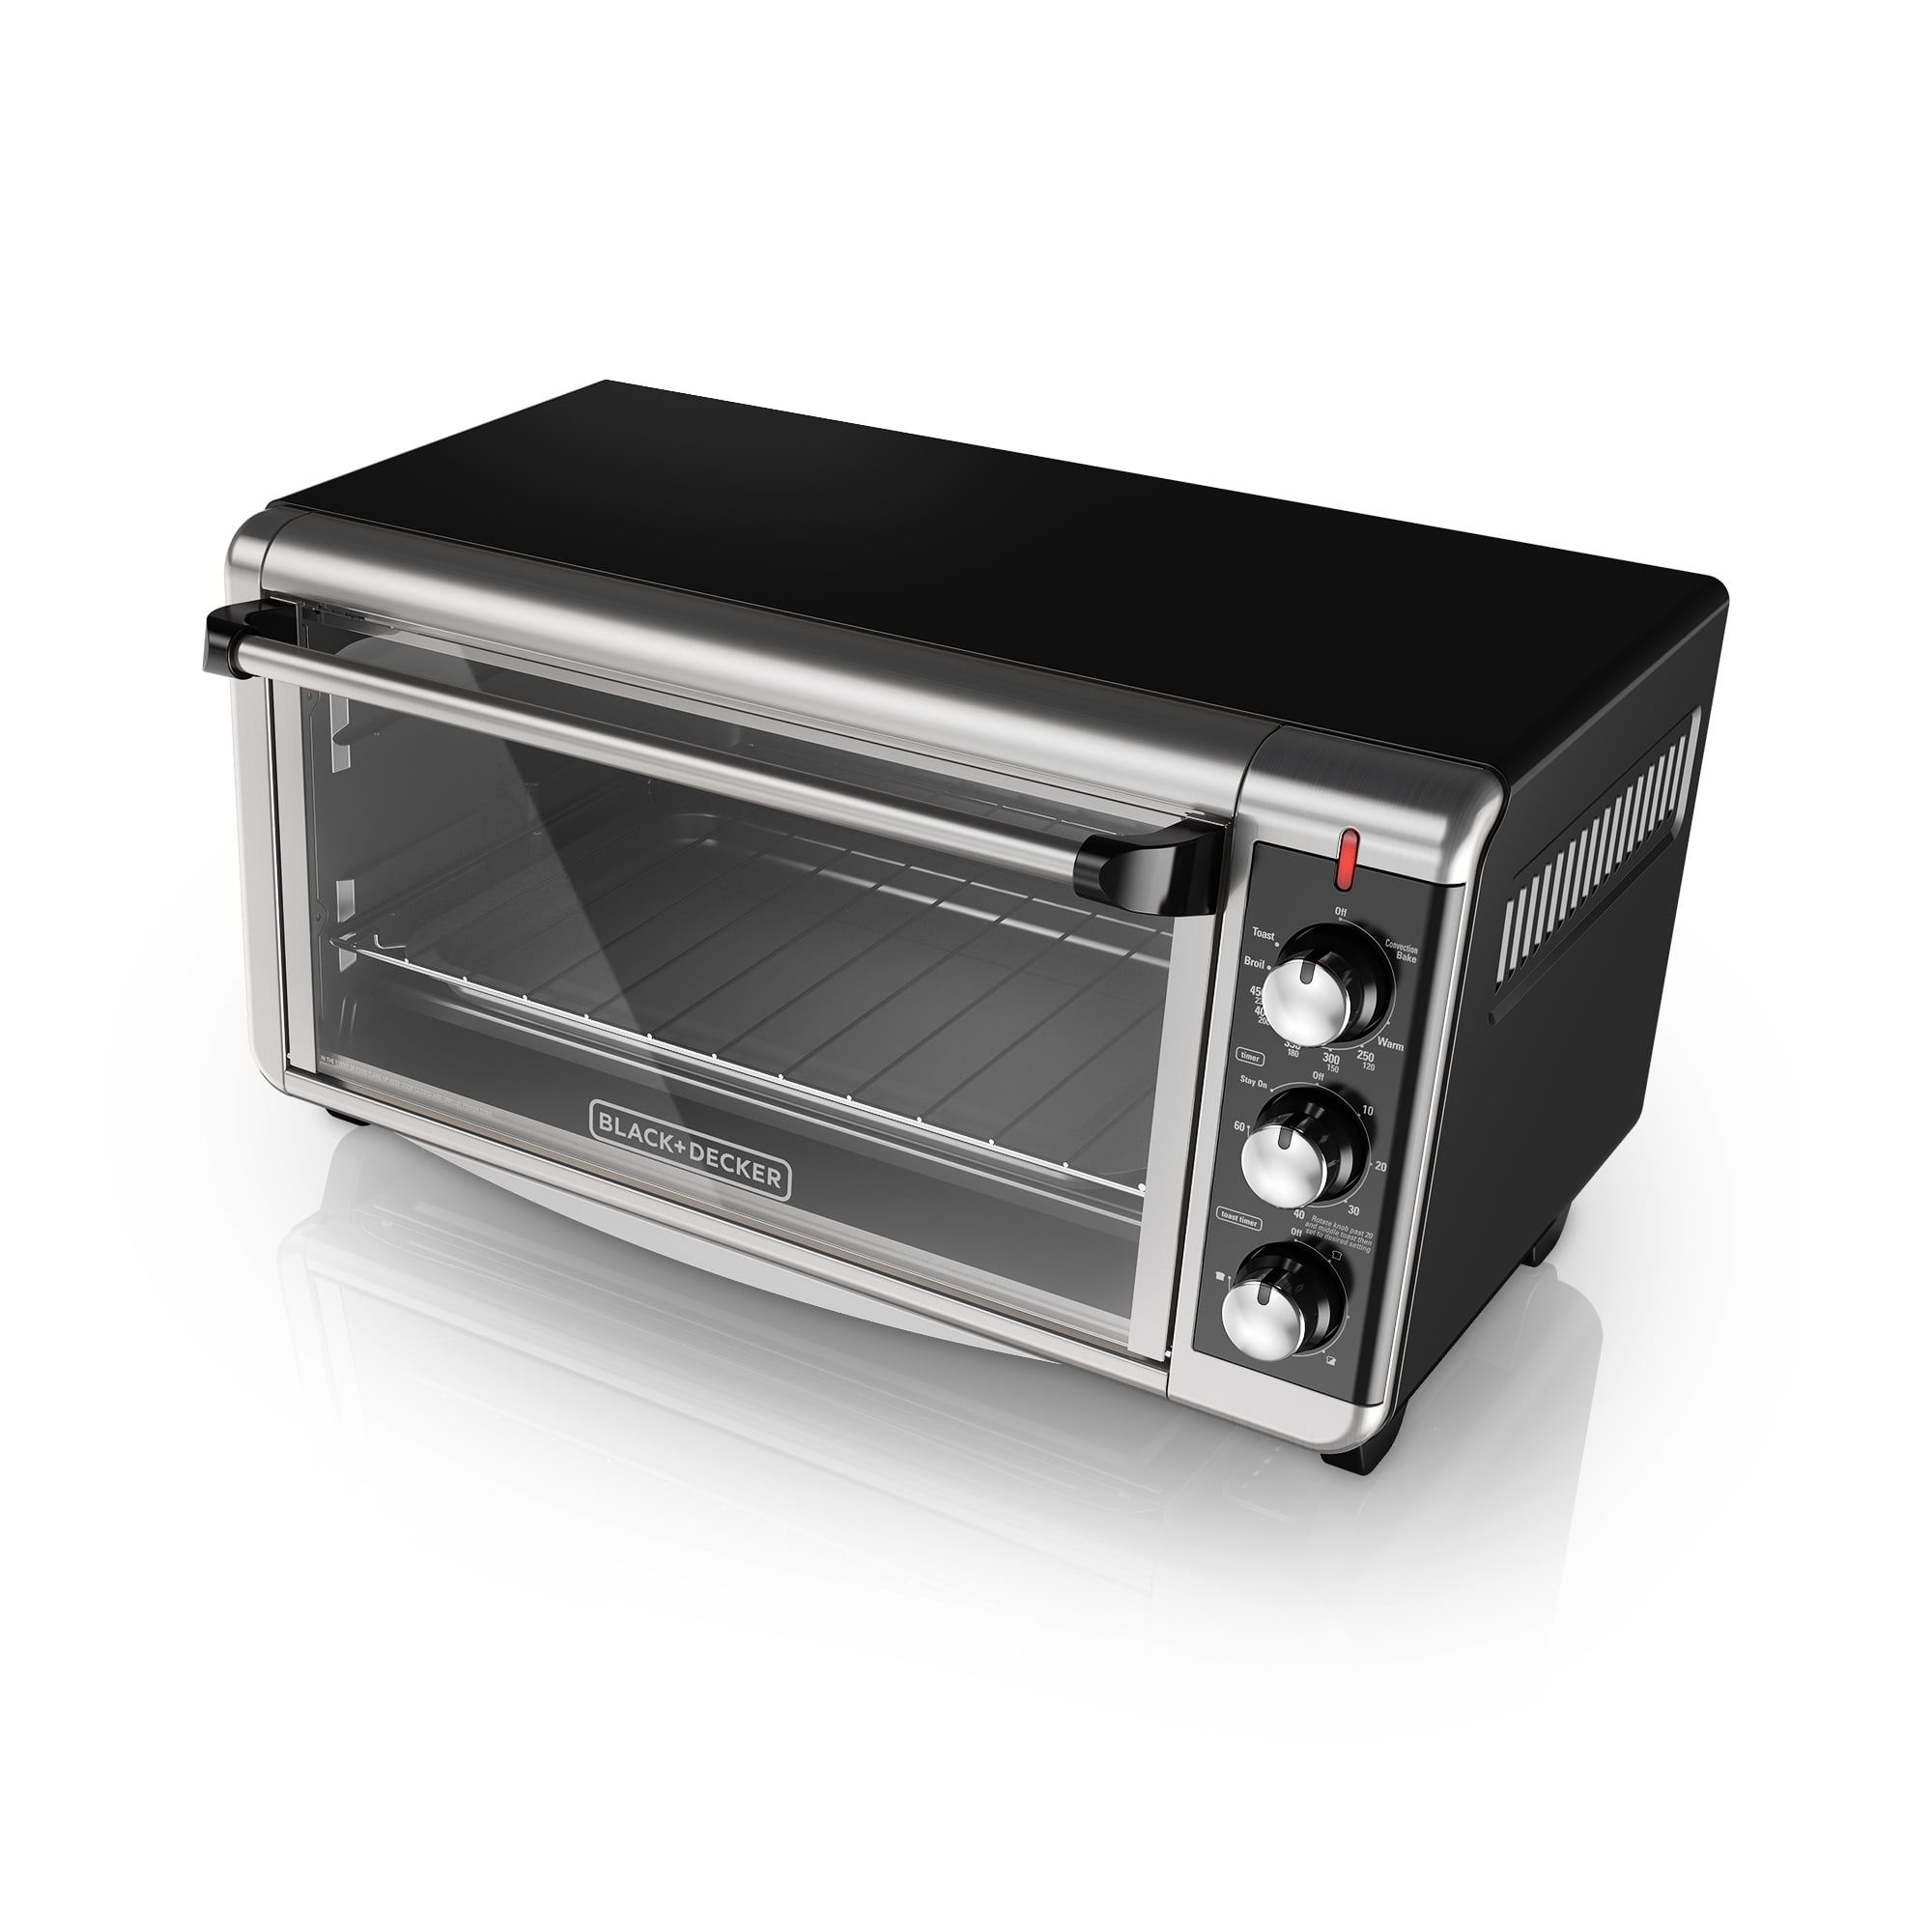 Buy a Toaster Oven, Countertop Toaster Oven TO1420B